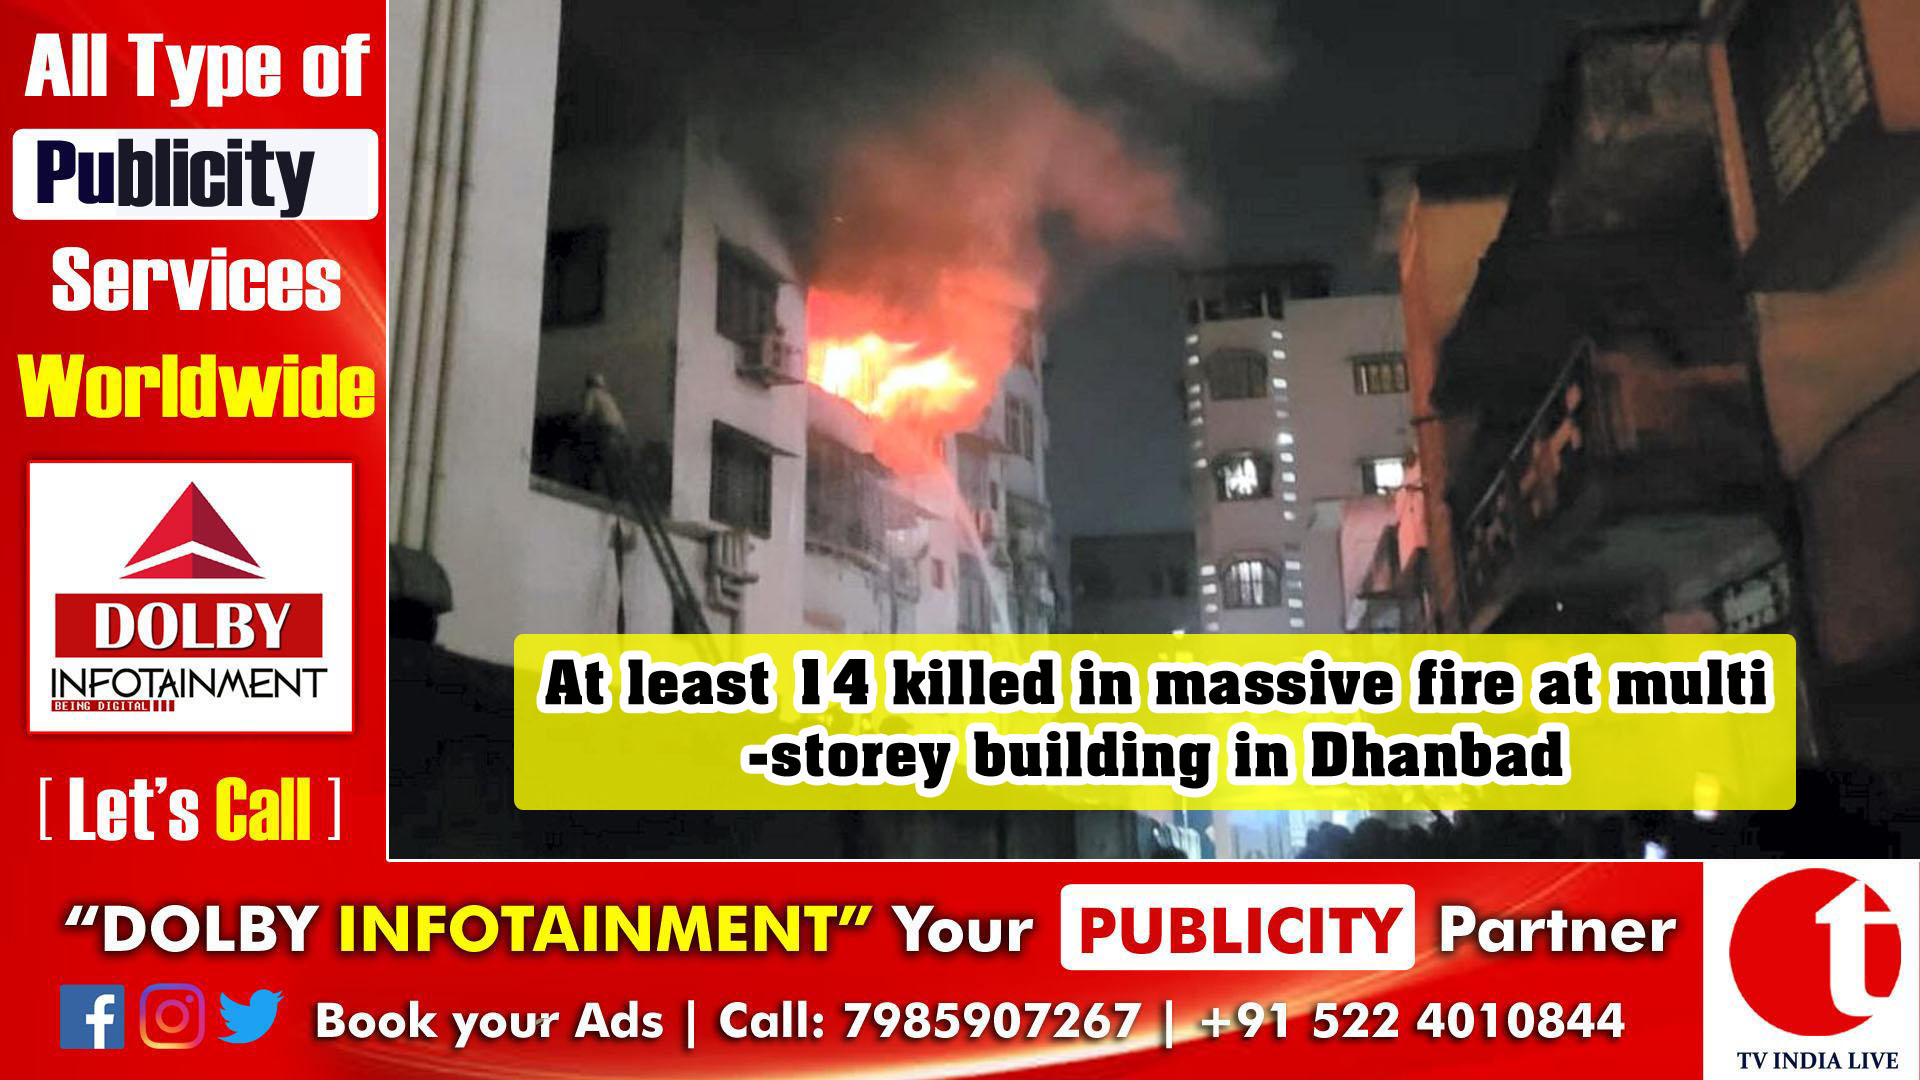 At least 14 killed in massive fire at multi-storey building in Dhanbad